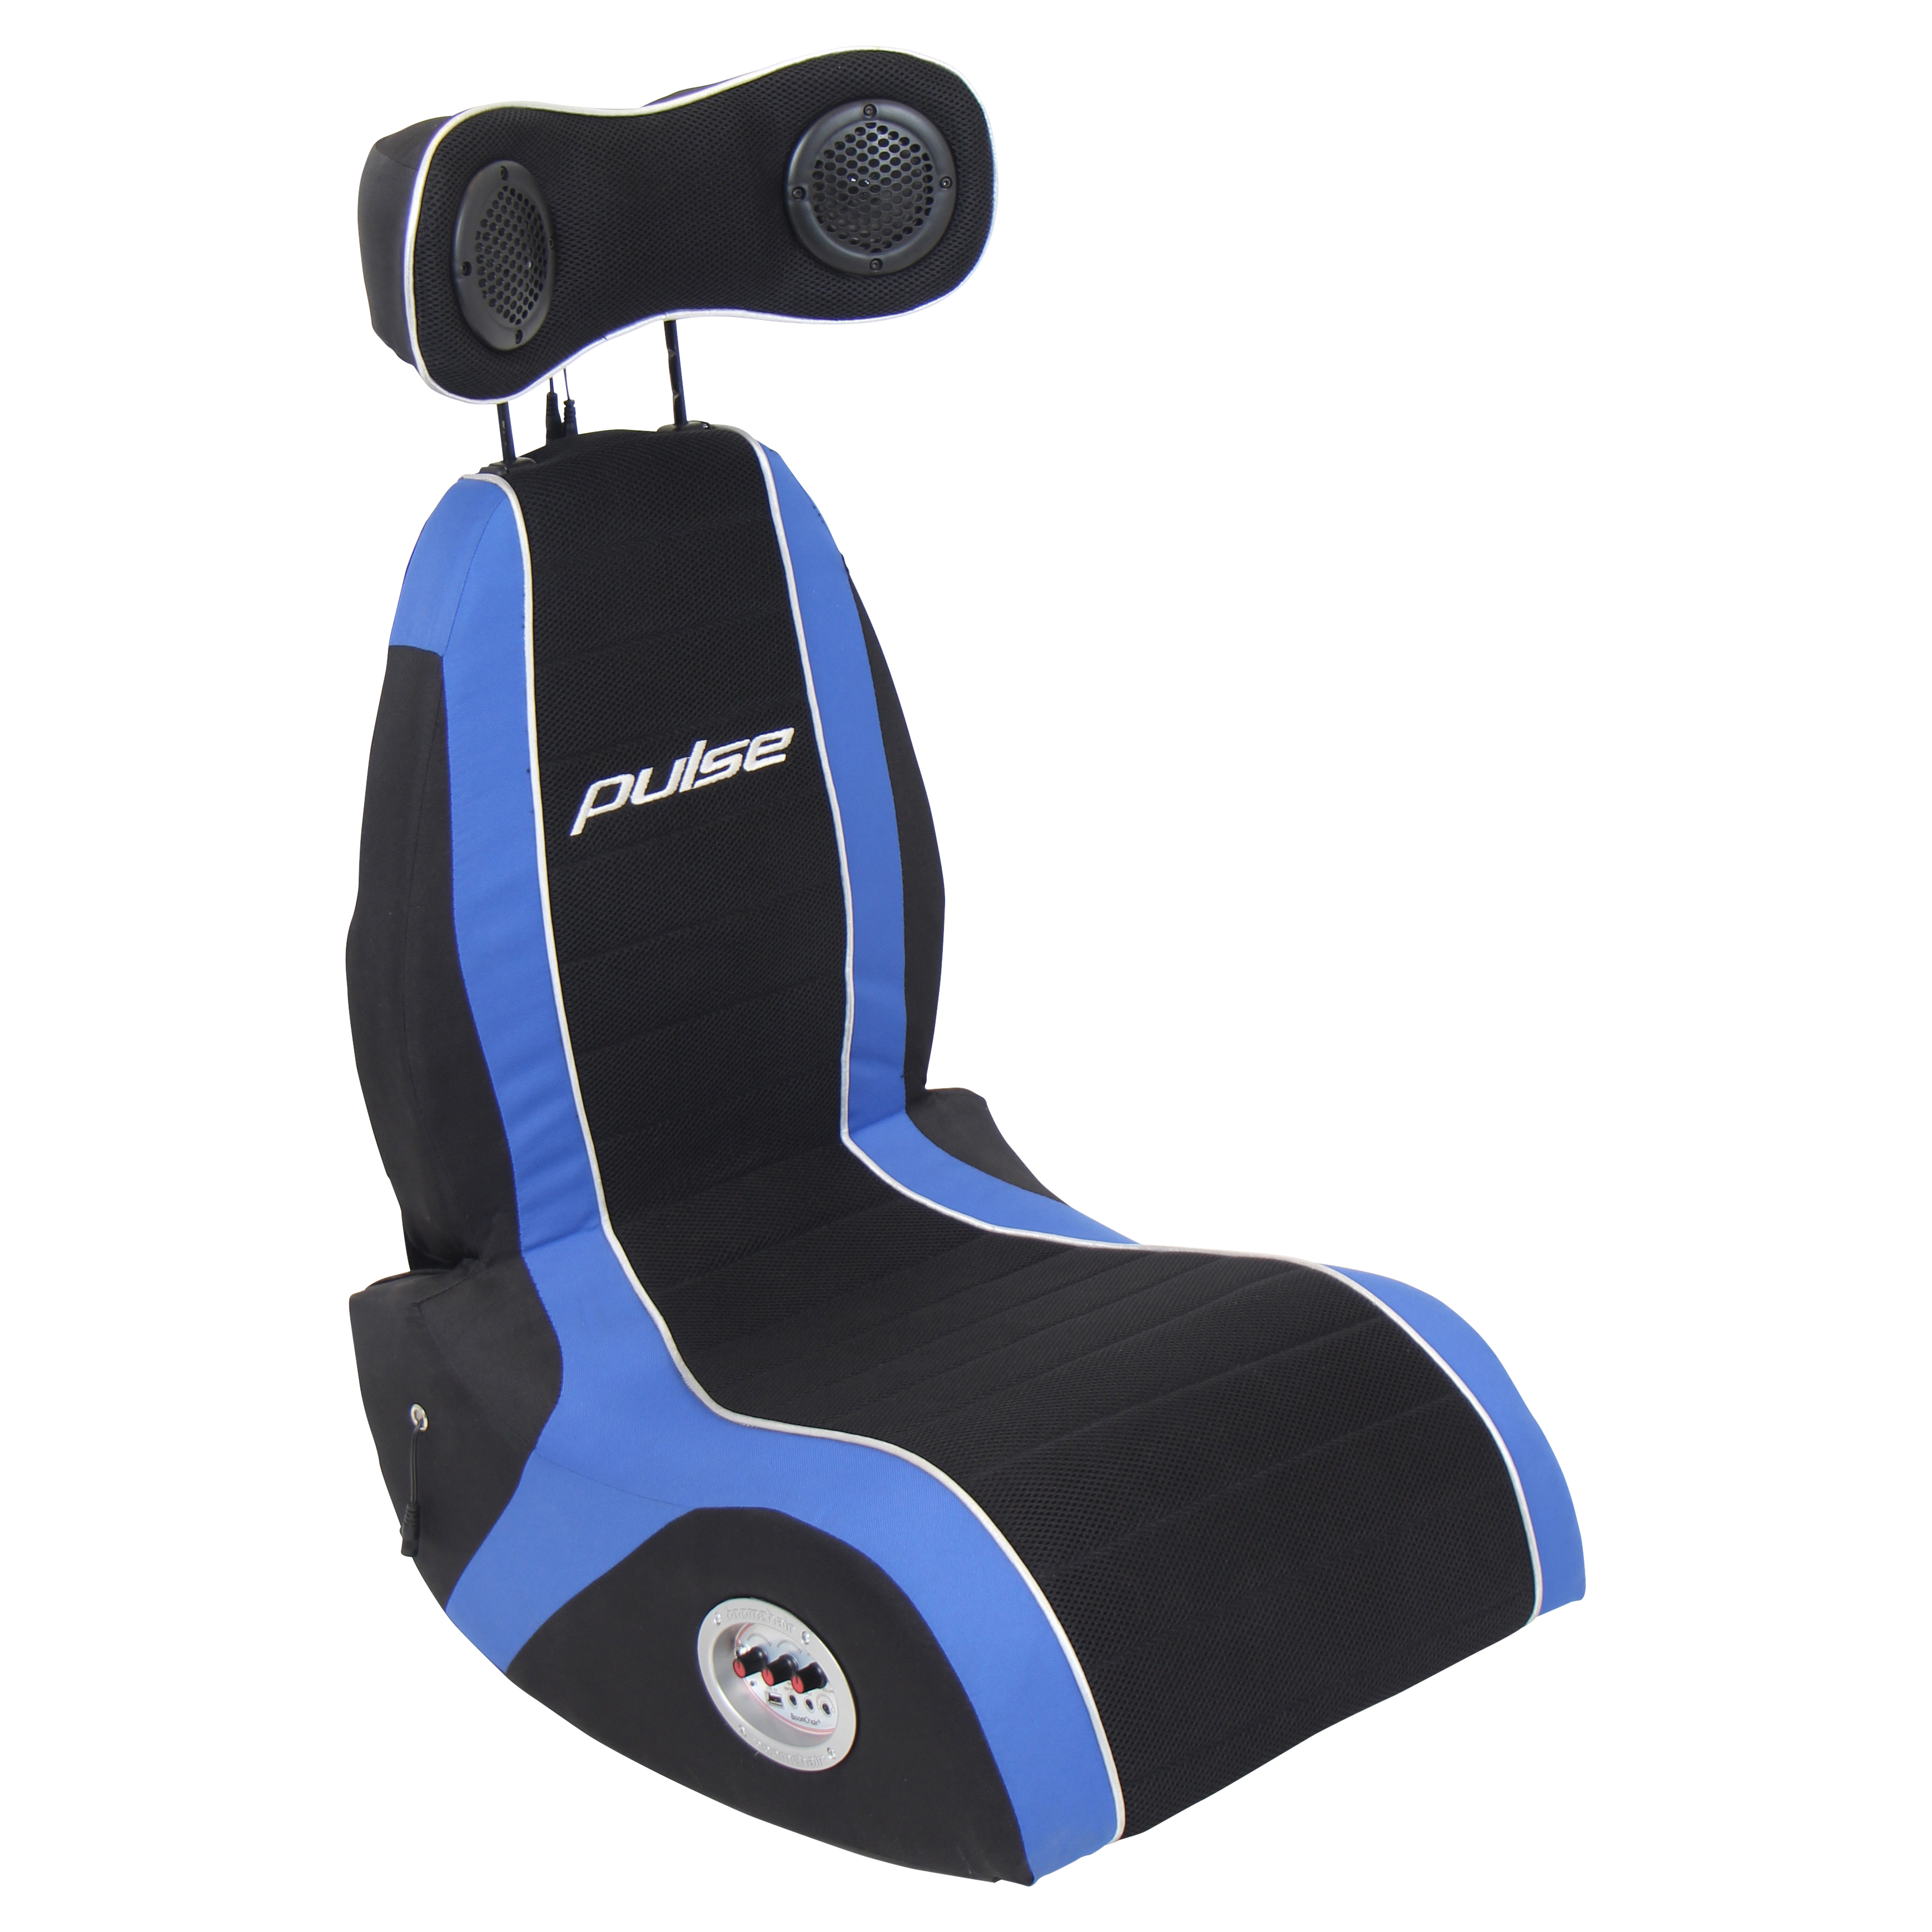 *HURRY* Lumisource BoomChiair® Pulse Bt Gaming Chair Only $79.99!